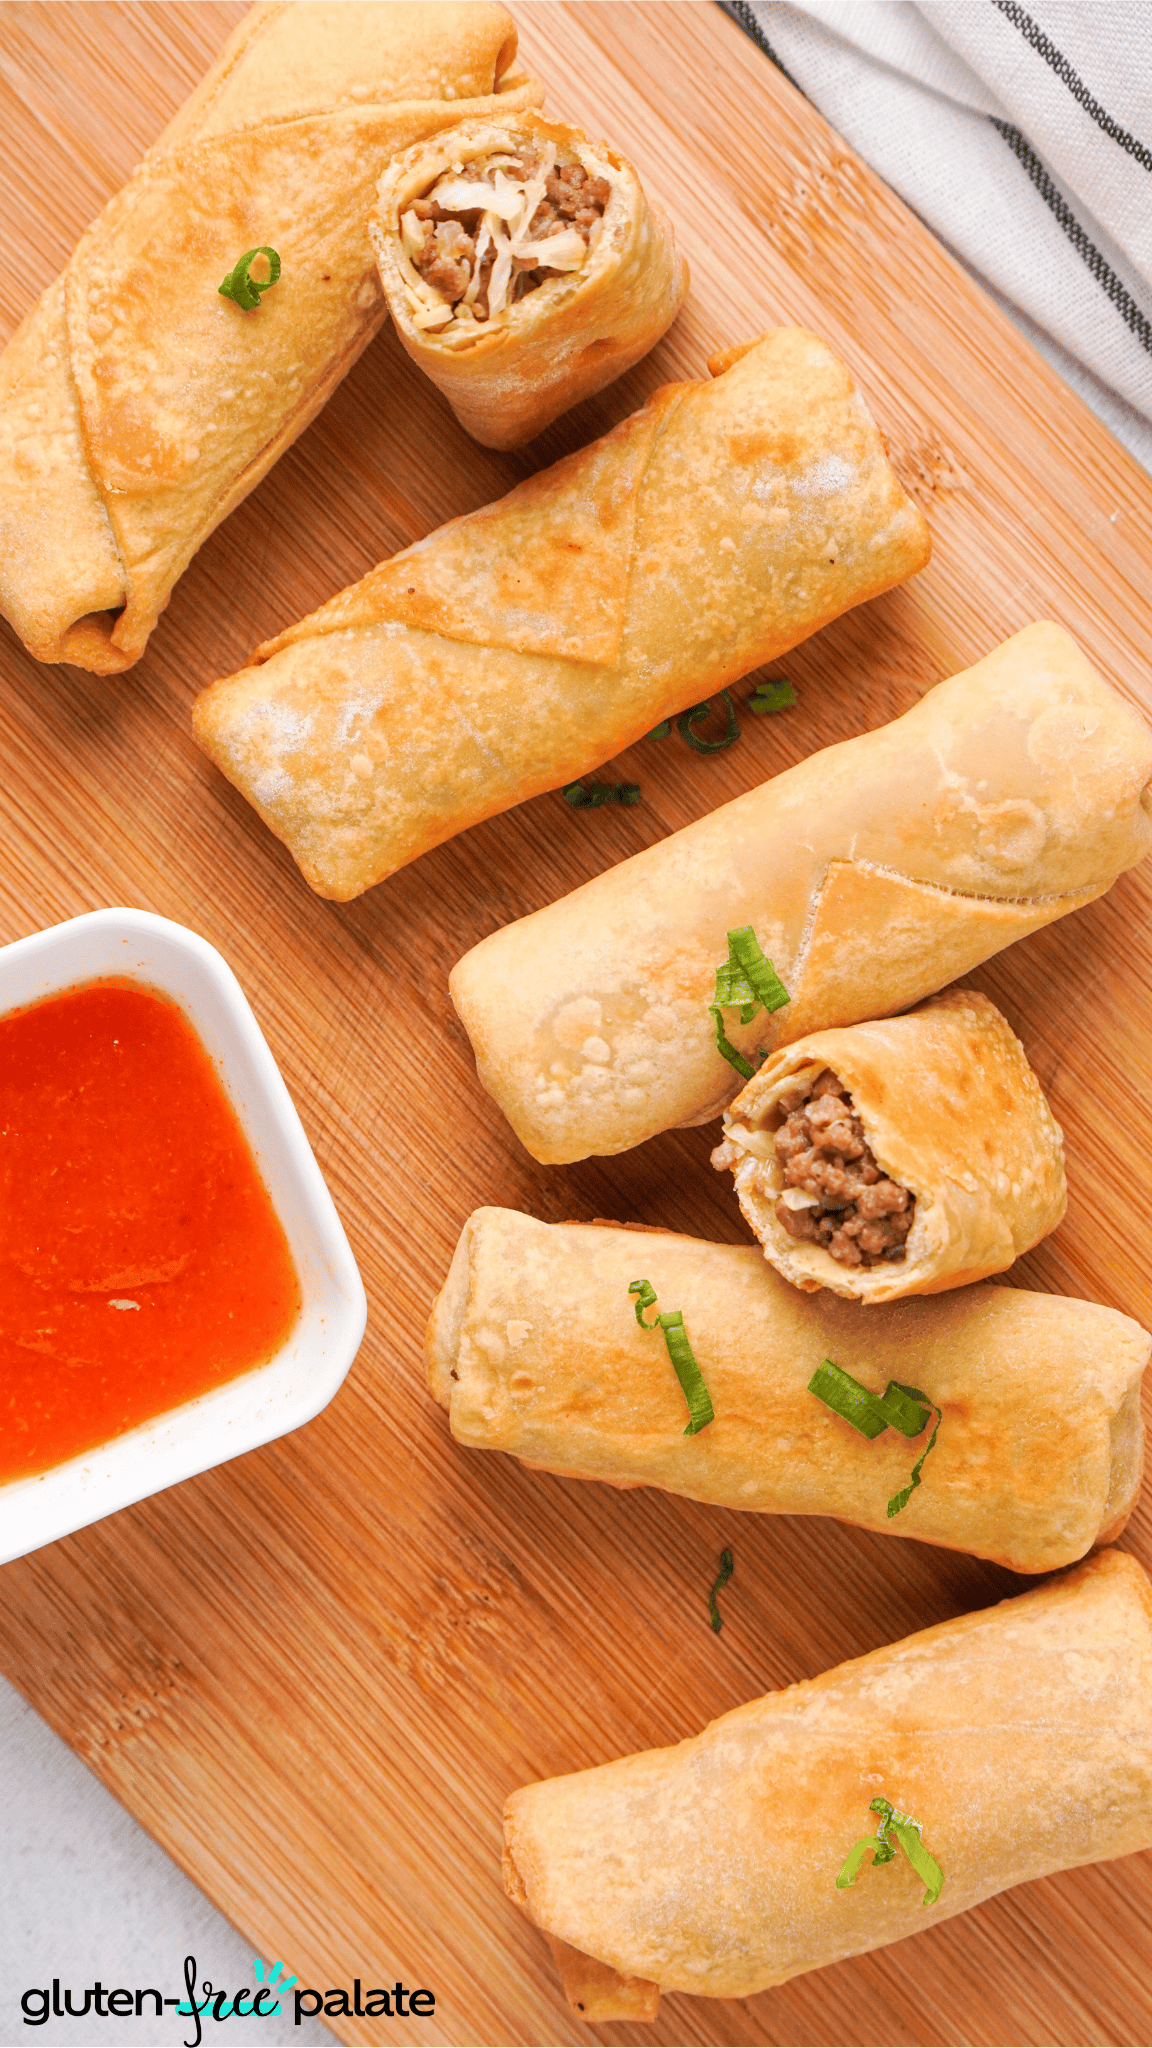 gluten-free egg rolls on a wooden board with dipping sauce.